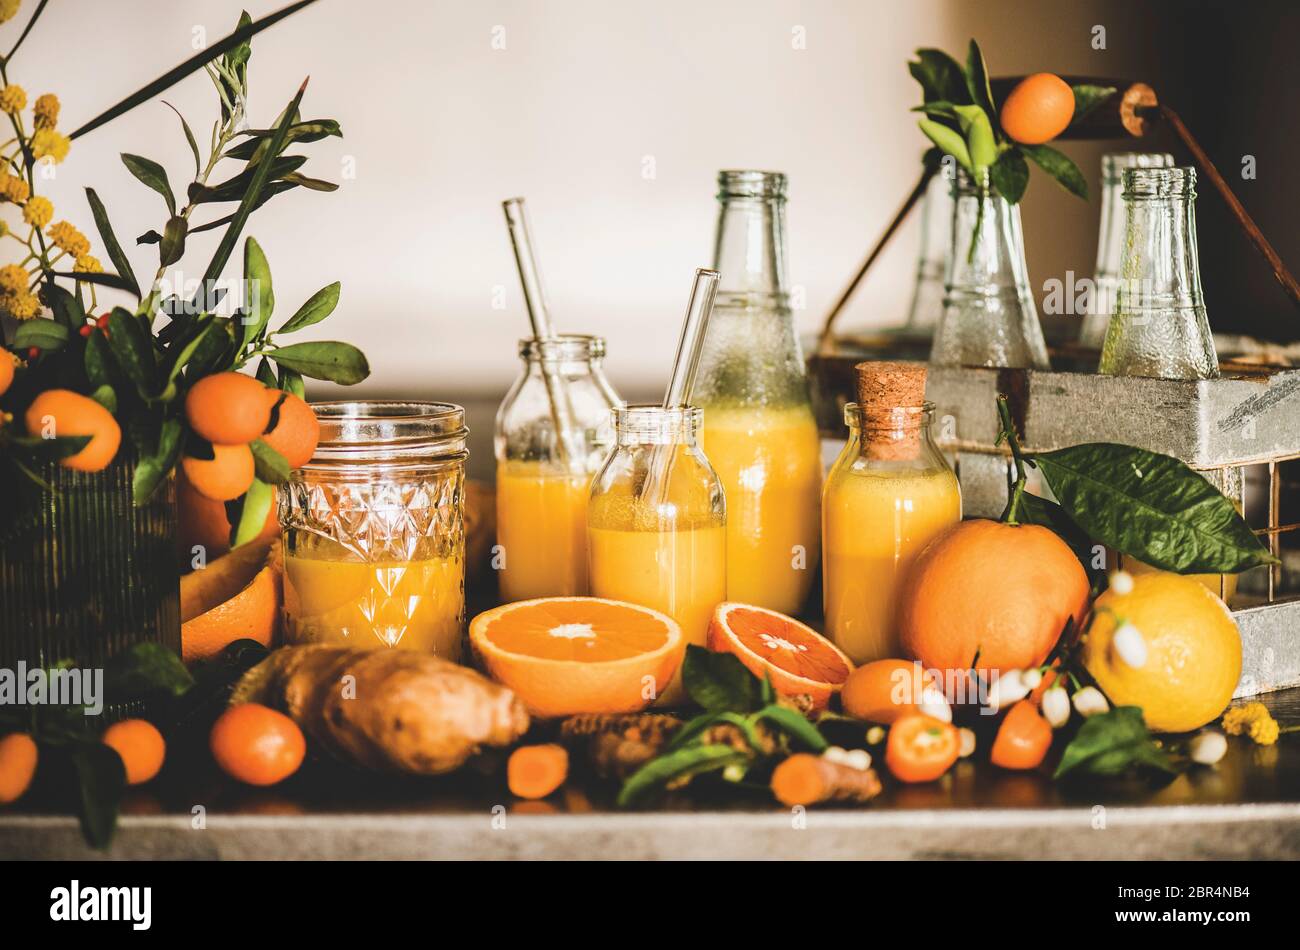 Immune boosting vitamin health defending drink. Turmeric, ginger and citrus juice shots in bottles and fresh plant ingredients over grey concrete kitc Stock Photo